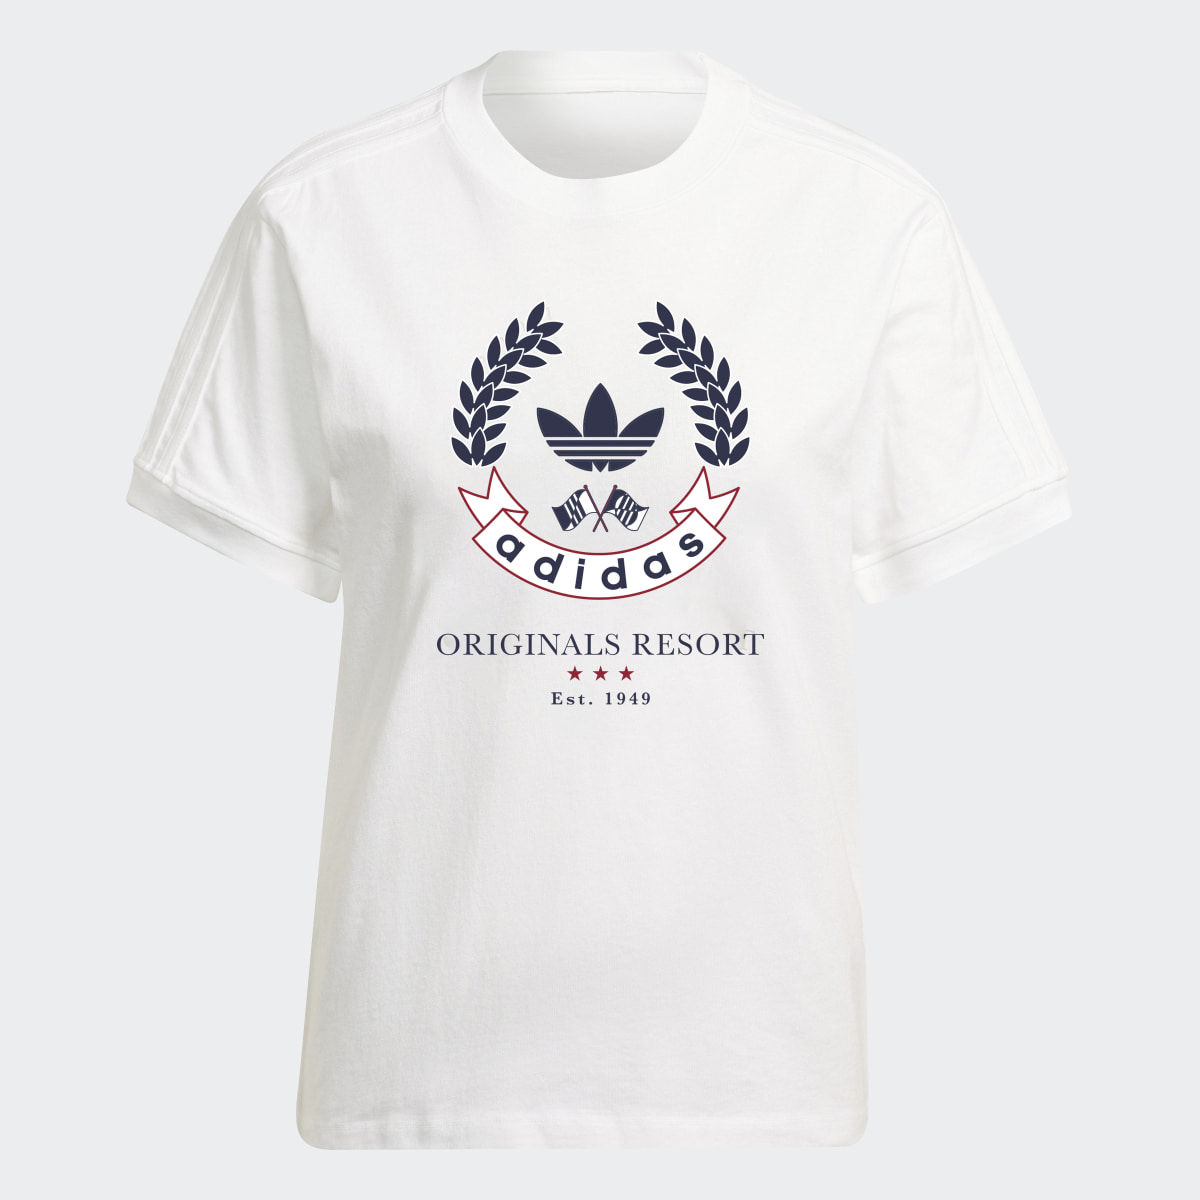 Adidas T-Shirt with Crest Graphic. 5